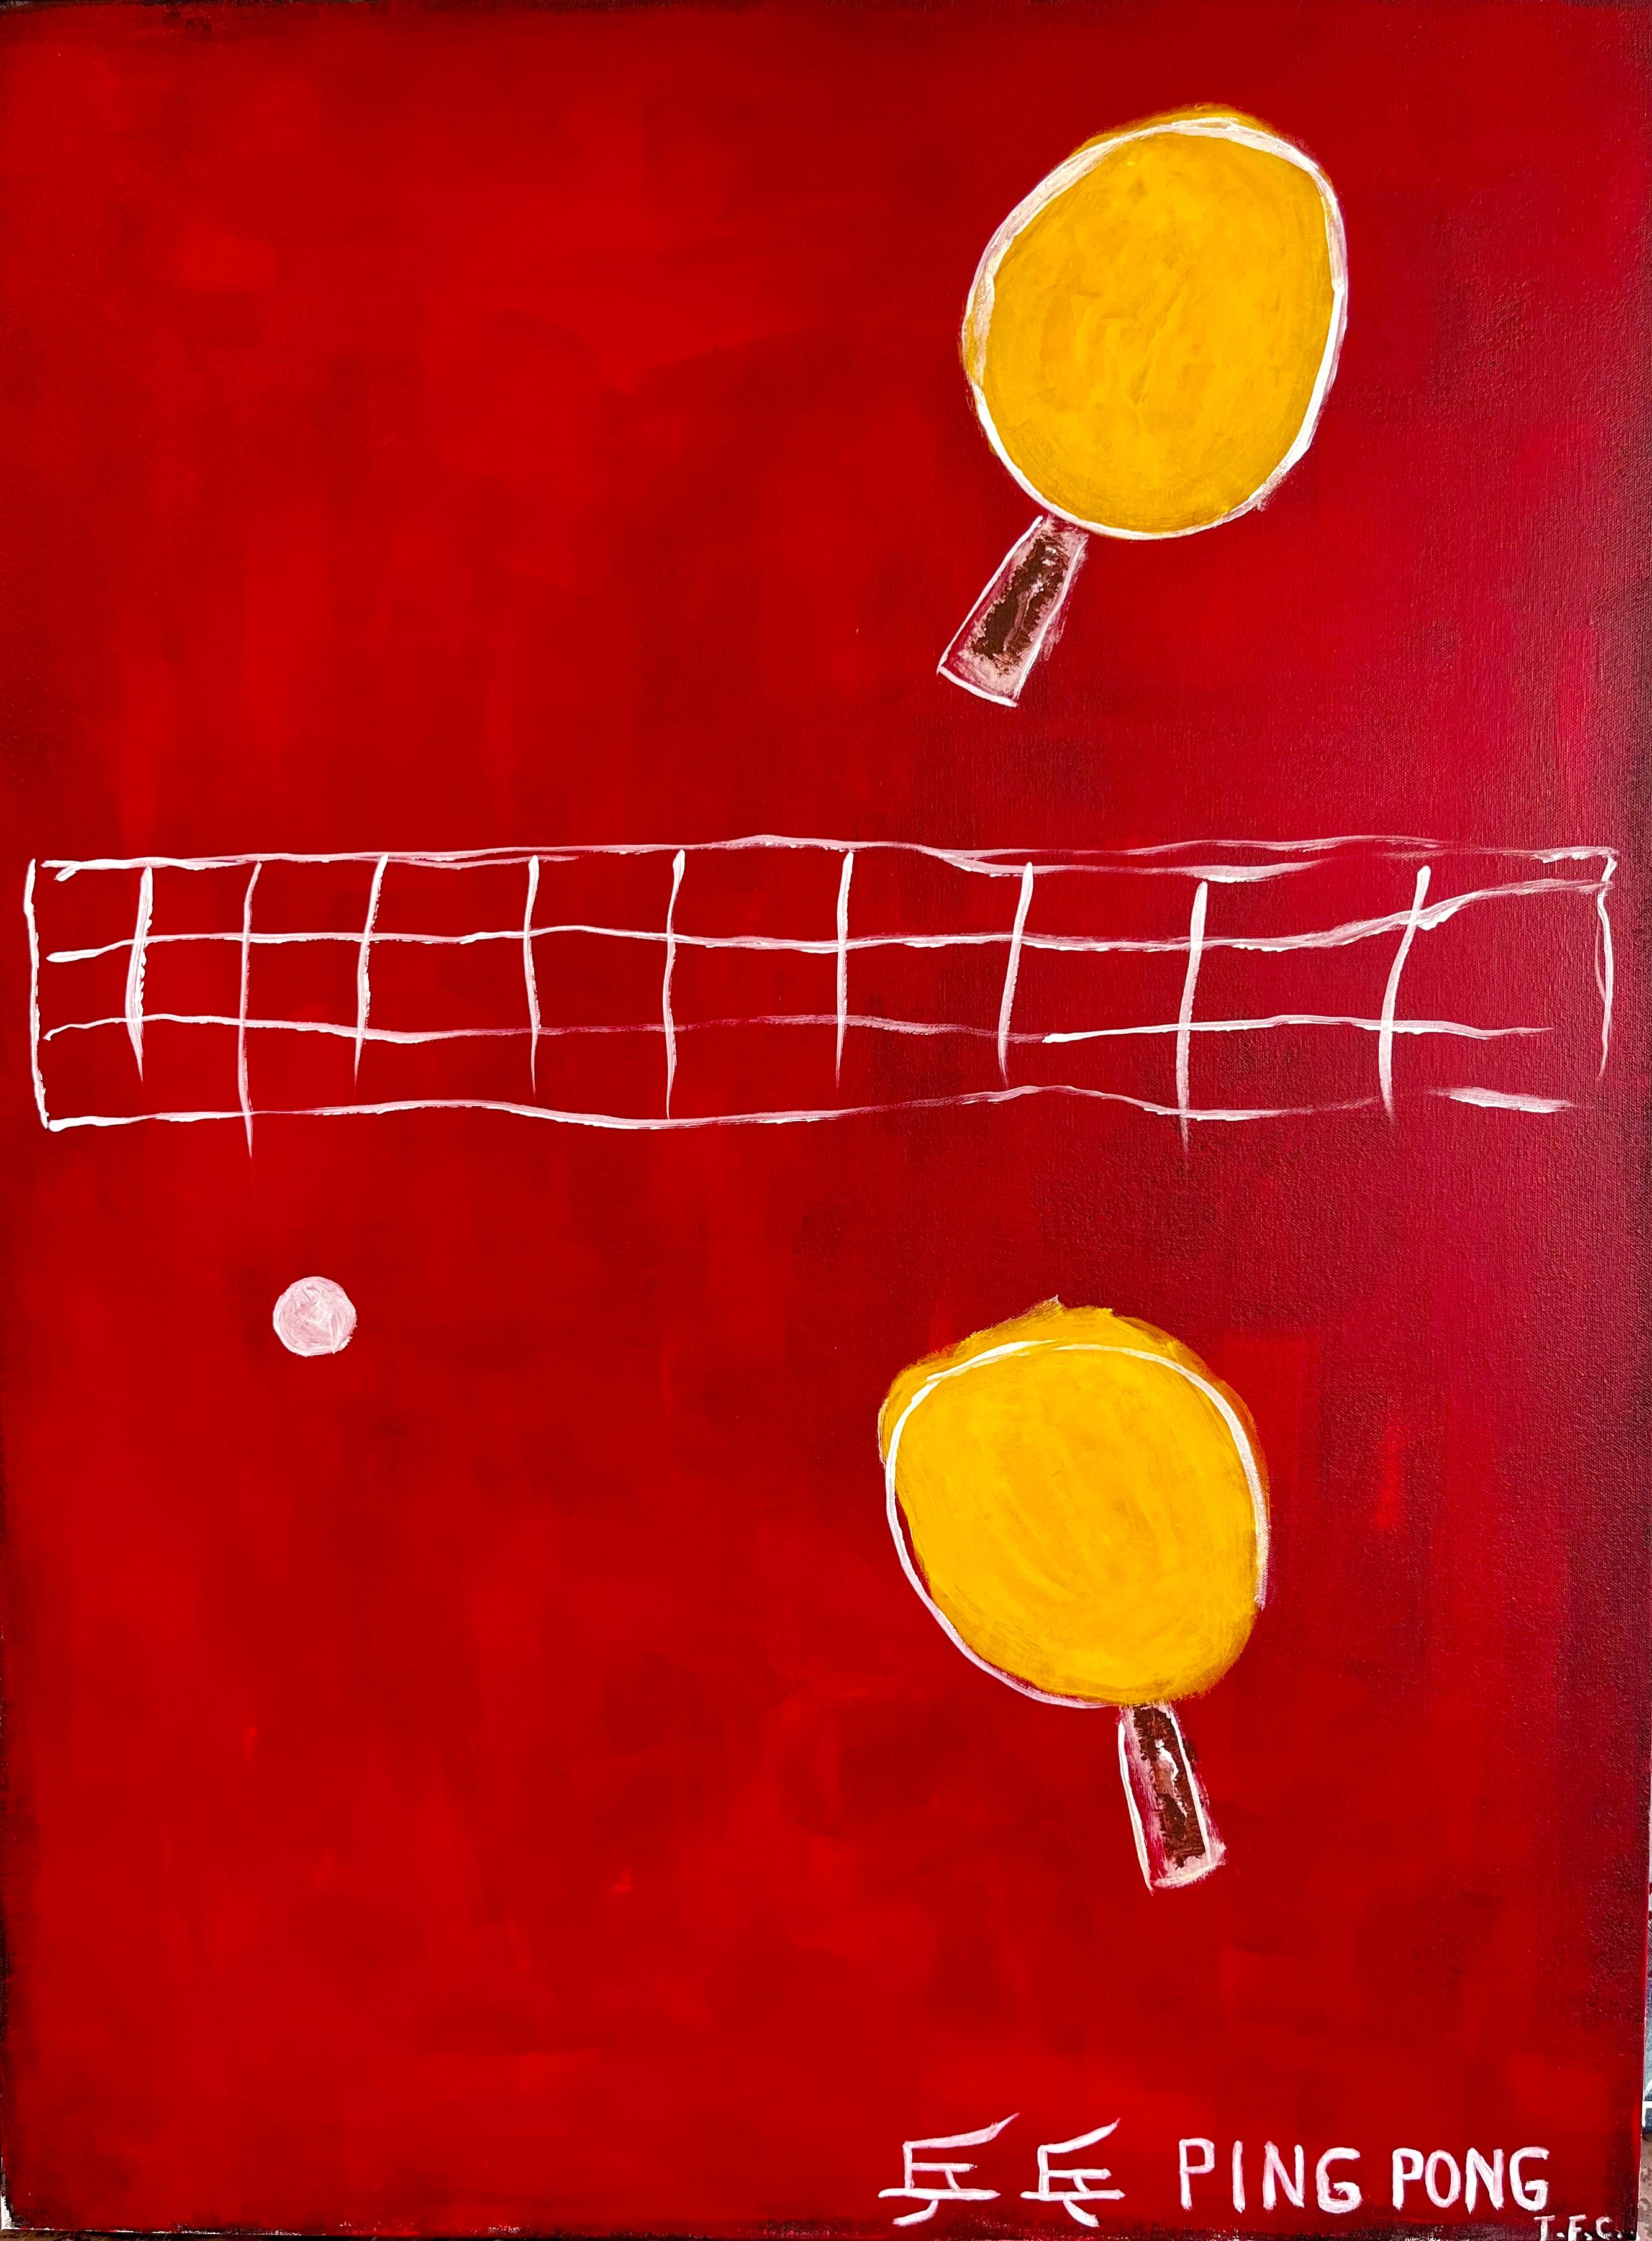 Tyler Casey Abstract Painting - "Ping Pong (Red)" Contemporary Abstract Pop Art Painting